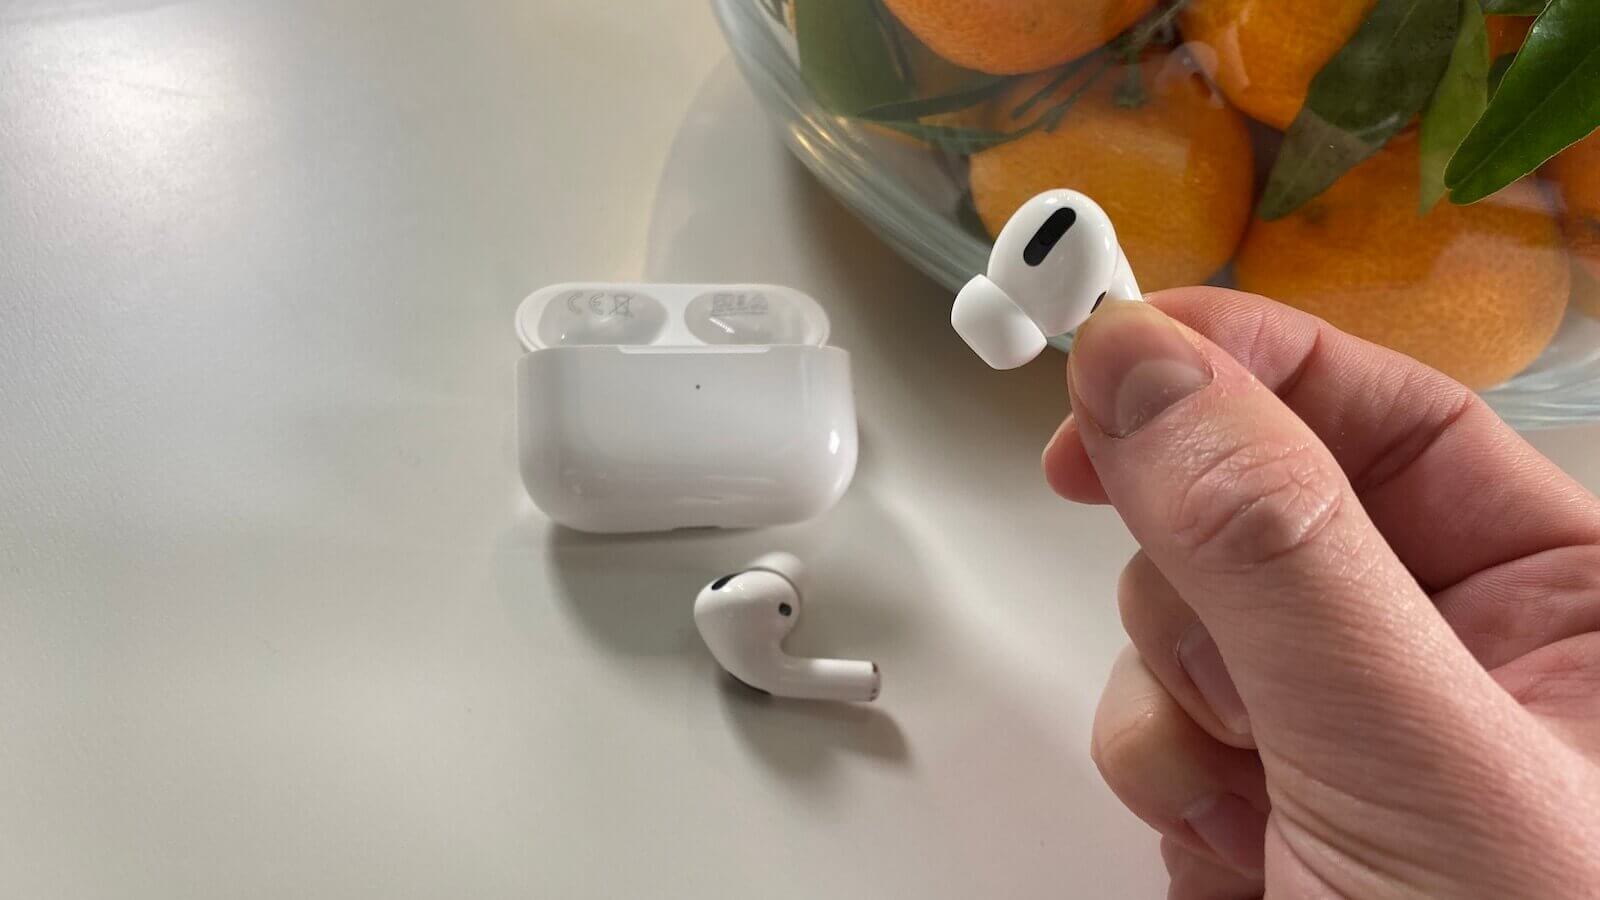 How To Clean the Apple AirPods Pro 2